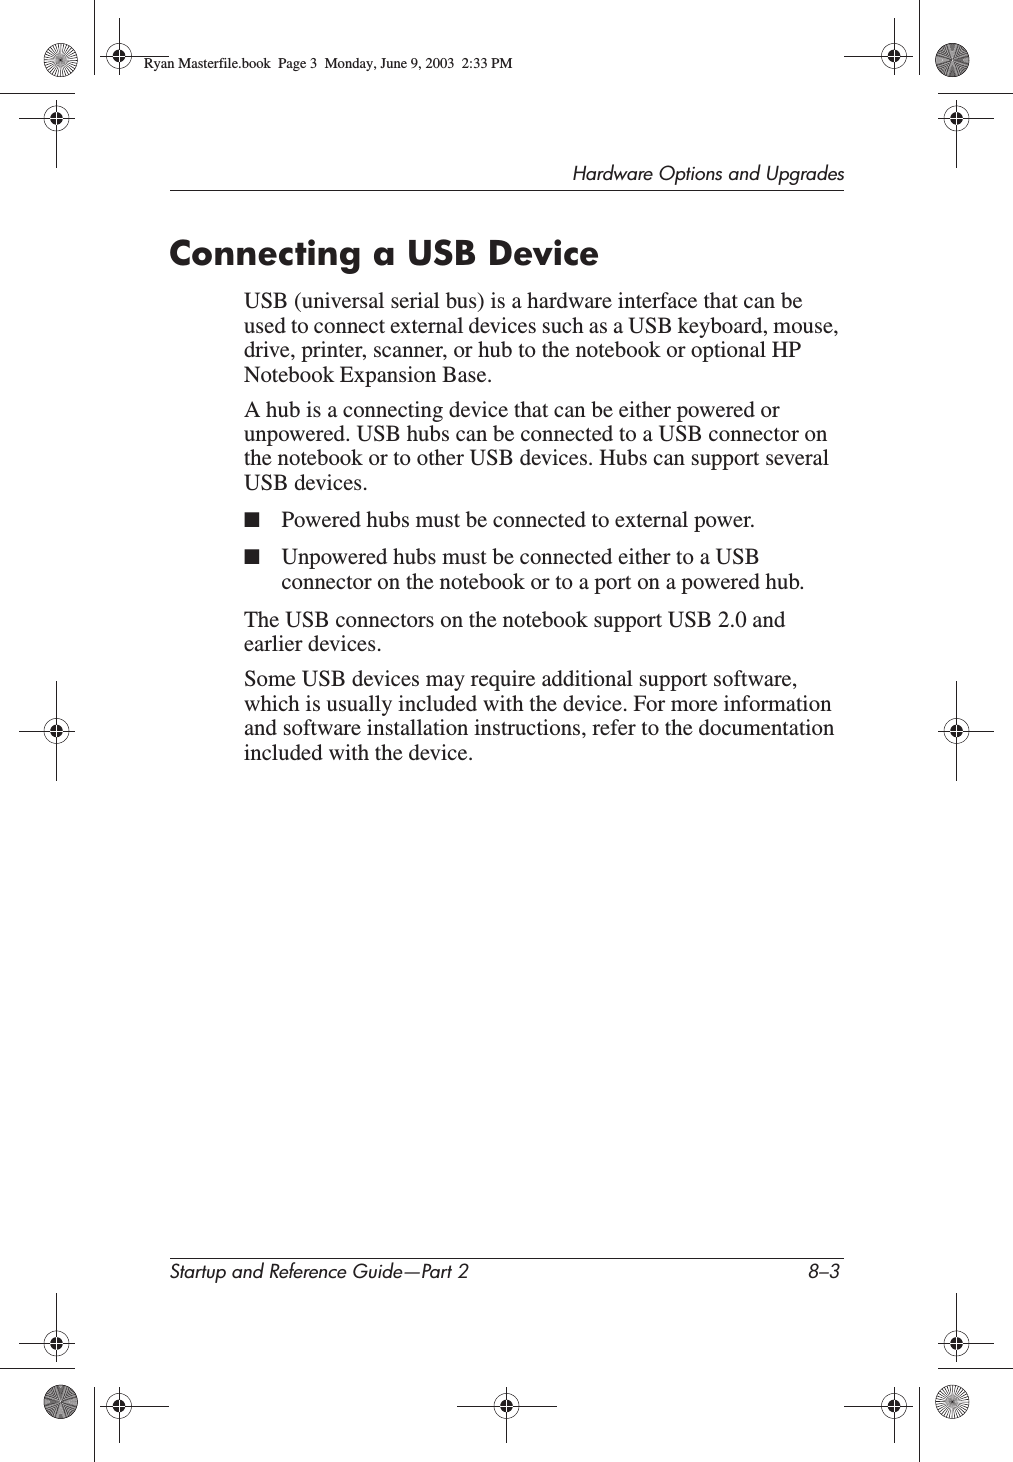 Hardware Options and UpgradesStartup and Reference Guide—Part 2 8–3Connecting a USB DeviceUSB (universal serial bus) is a hardware interface that can be used to connect external devices such as a USB keyboard, mouse, drive, printer, scanner, or hub to the notebook or optional HP Notebook Expansion Base.A hub is a connecting device that can be either powered or unpowered. USB hubs can be connected to a USB connector on the notebook or to other USB devices. Hubs can support several USB devices.■Powered hubs must be connected to external power.■Unpowered hubs must be connected either to a USB connector on the notebook or to a port on a powered hub.The USB connectors on the notebook support USB 2.0 and earlier devices.Some USB devices may require additional support software, which is usually included with the device. For more information and software installation instructions, refer to the documentation included with the device.Ryan Masterfile.book  Page 3  Monday, June 9, 2003  2:33 PM